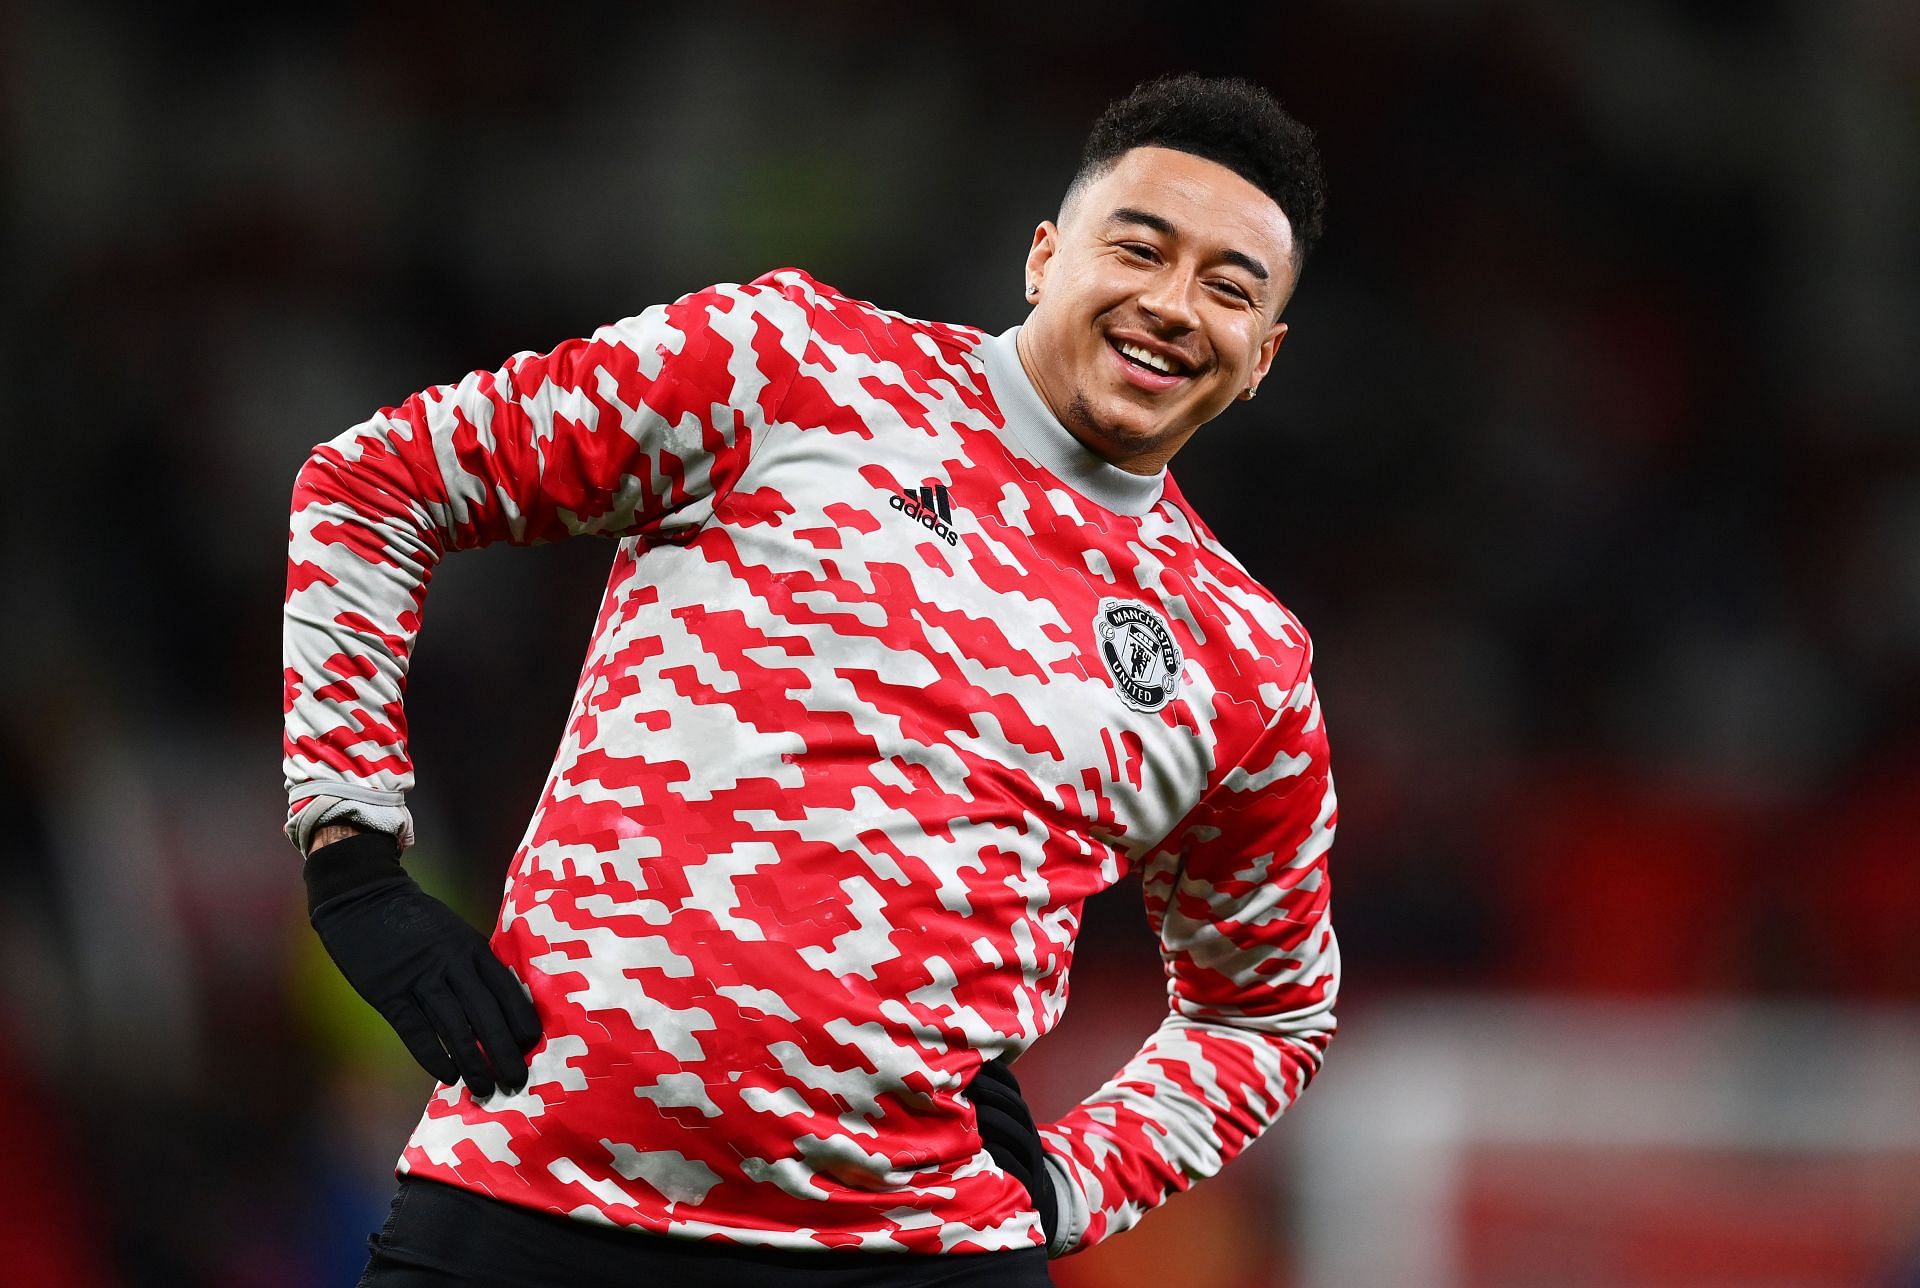 Newcastle United are ready to offer &pound;3 million for Jesse Lingard.